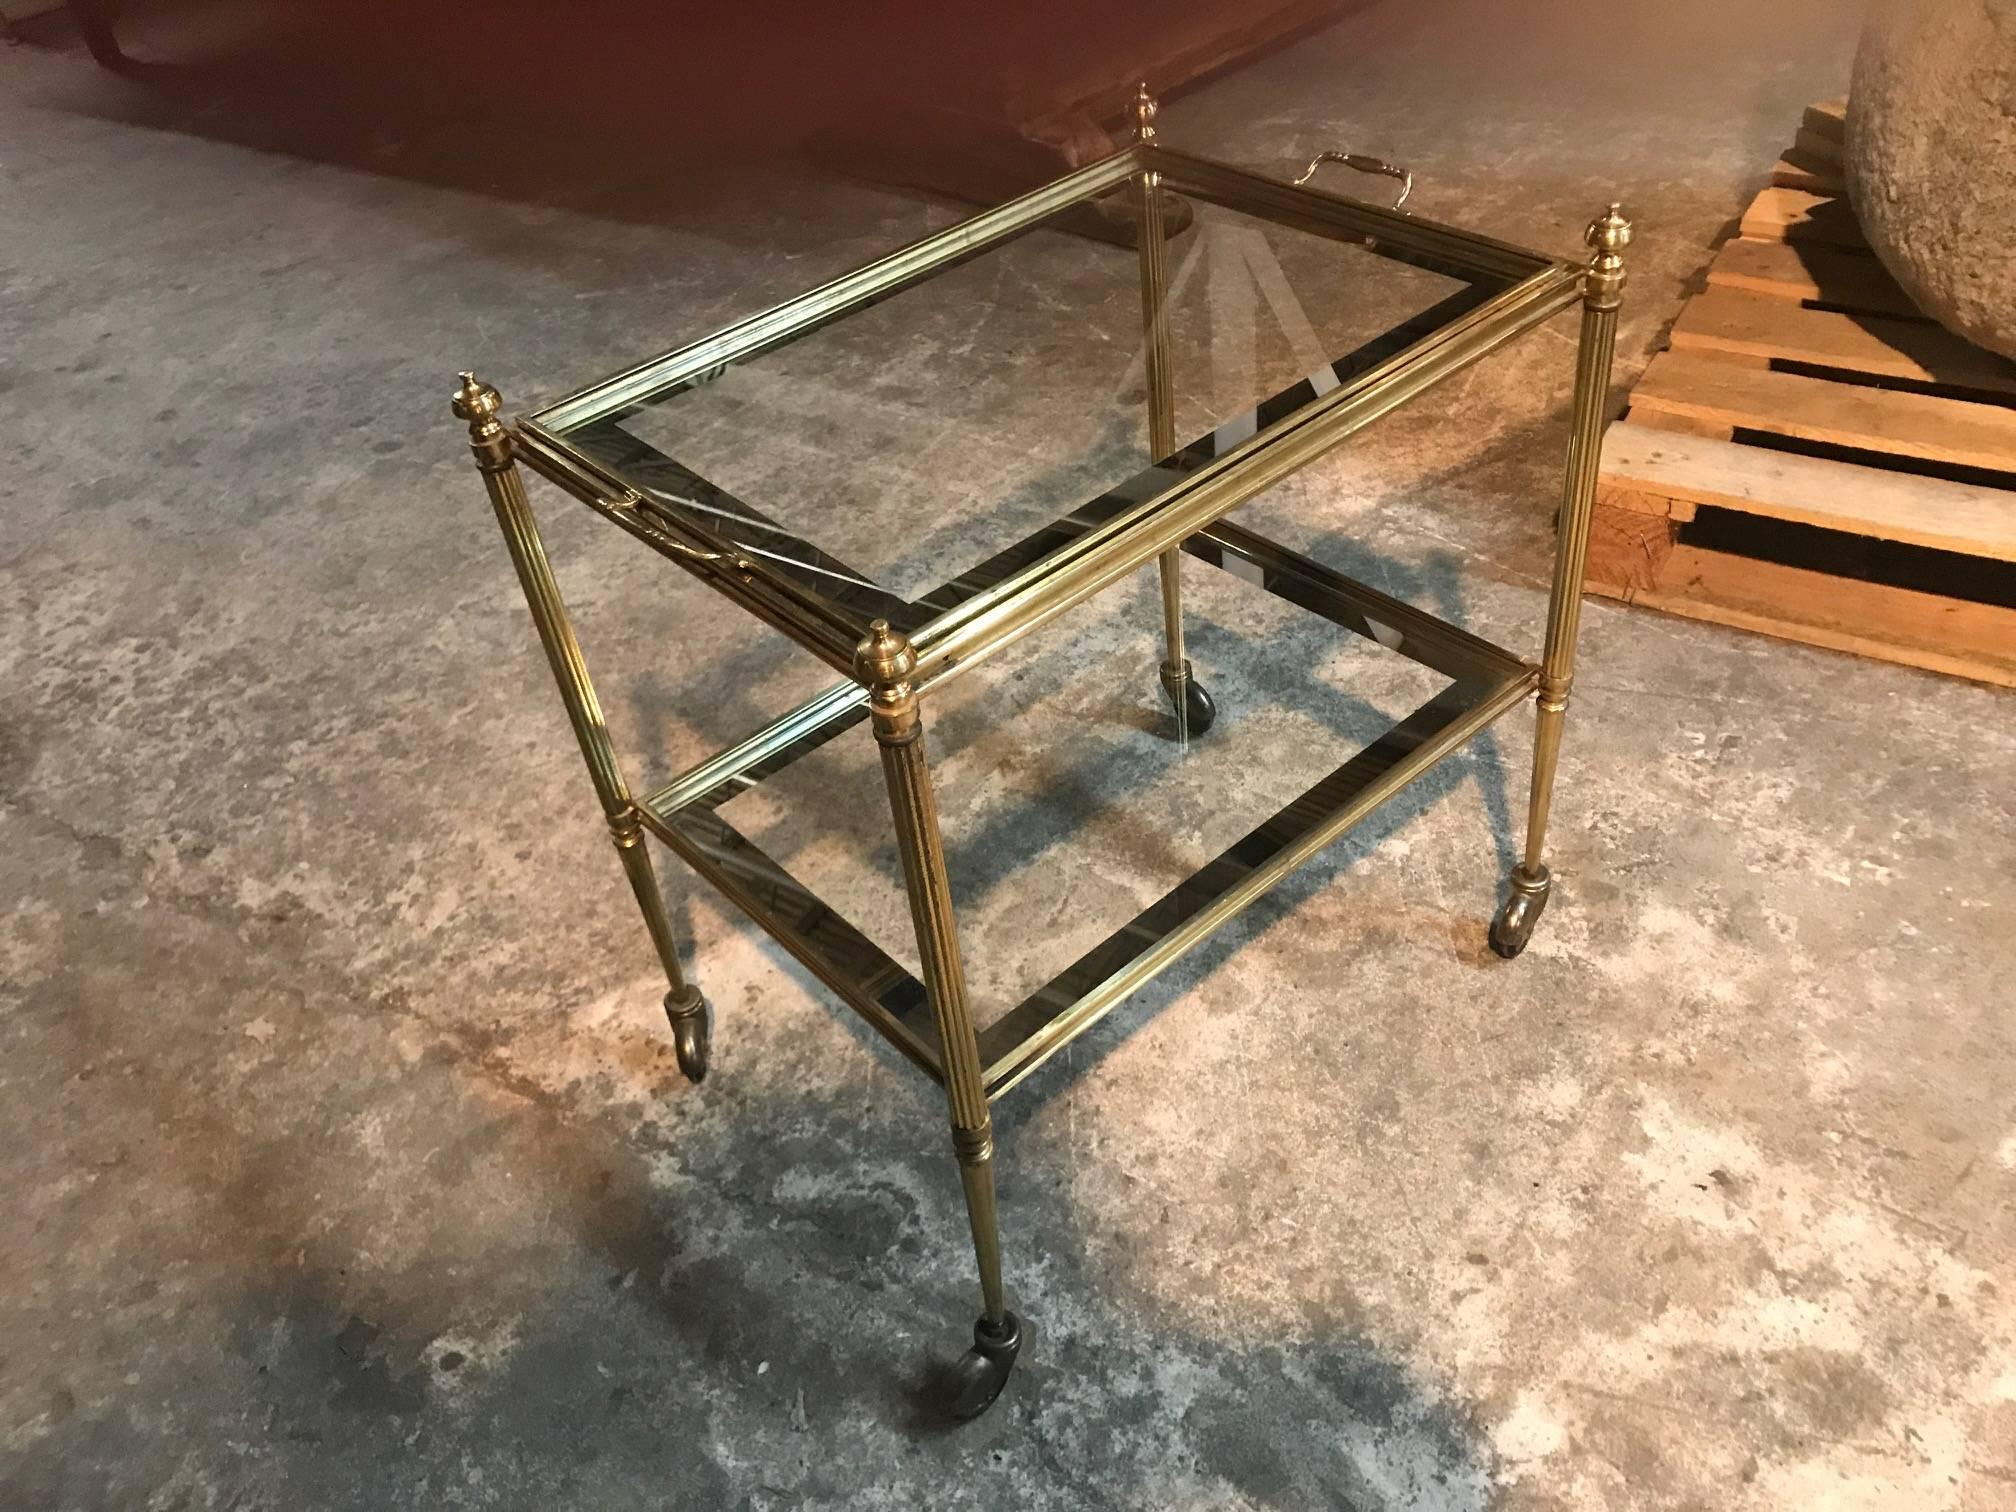 A very handsome midcentury Italian cocktail cart in brass, glass and mirror. The tray is removable. The glass is nicely trimmed with a mirrored band.